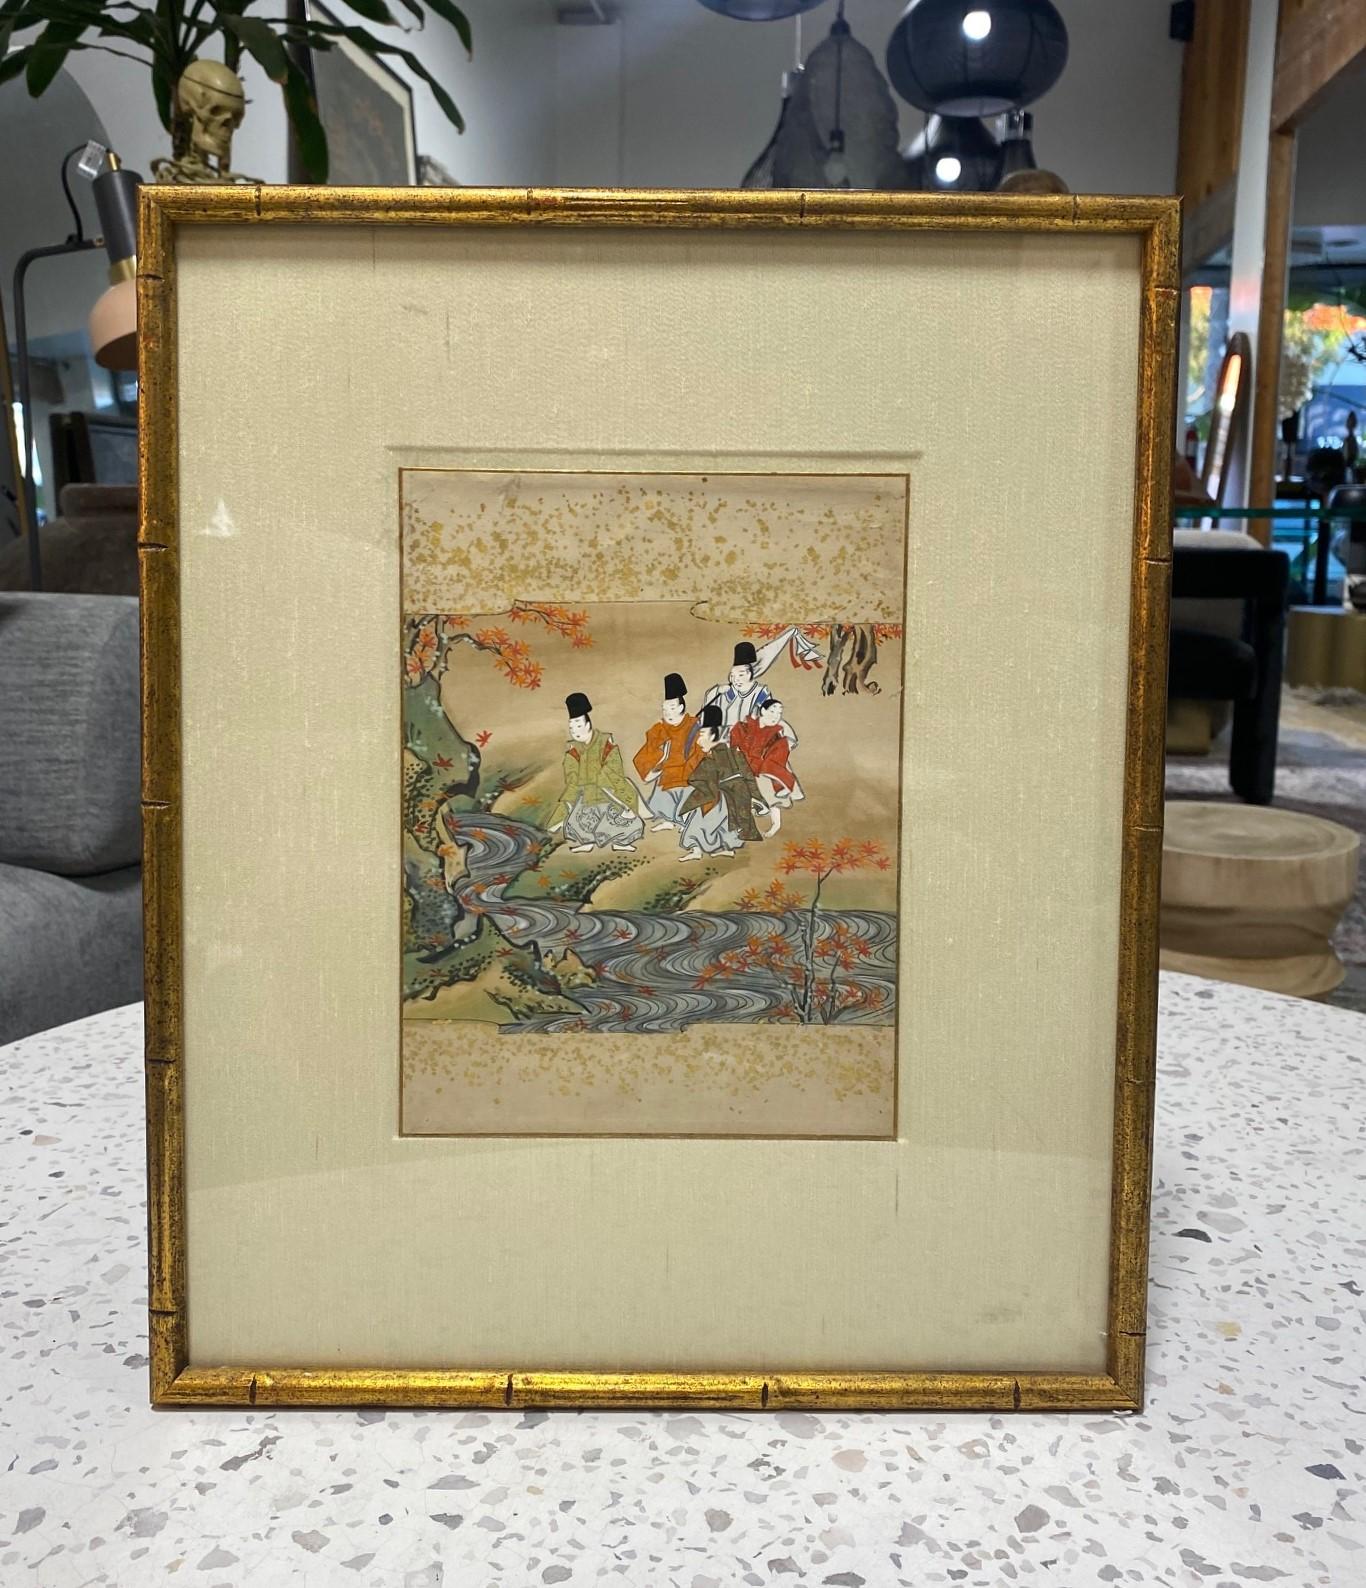 A beautiful, exquisitely painted gem, this small Japanese painting features a scene from the famous literary story Tale of the Genji.  The painting is done with intricate detail (in the costumes and flowing water) and vivid colors as well as